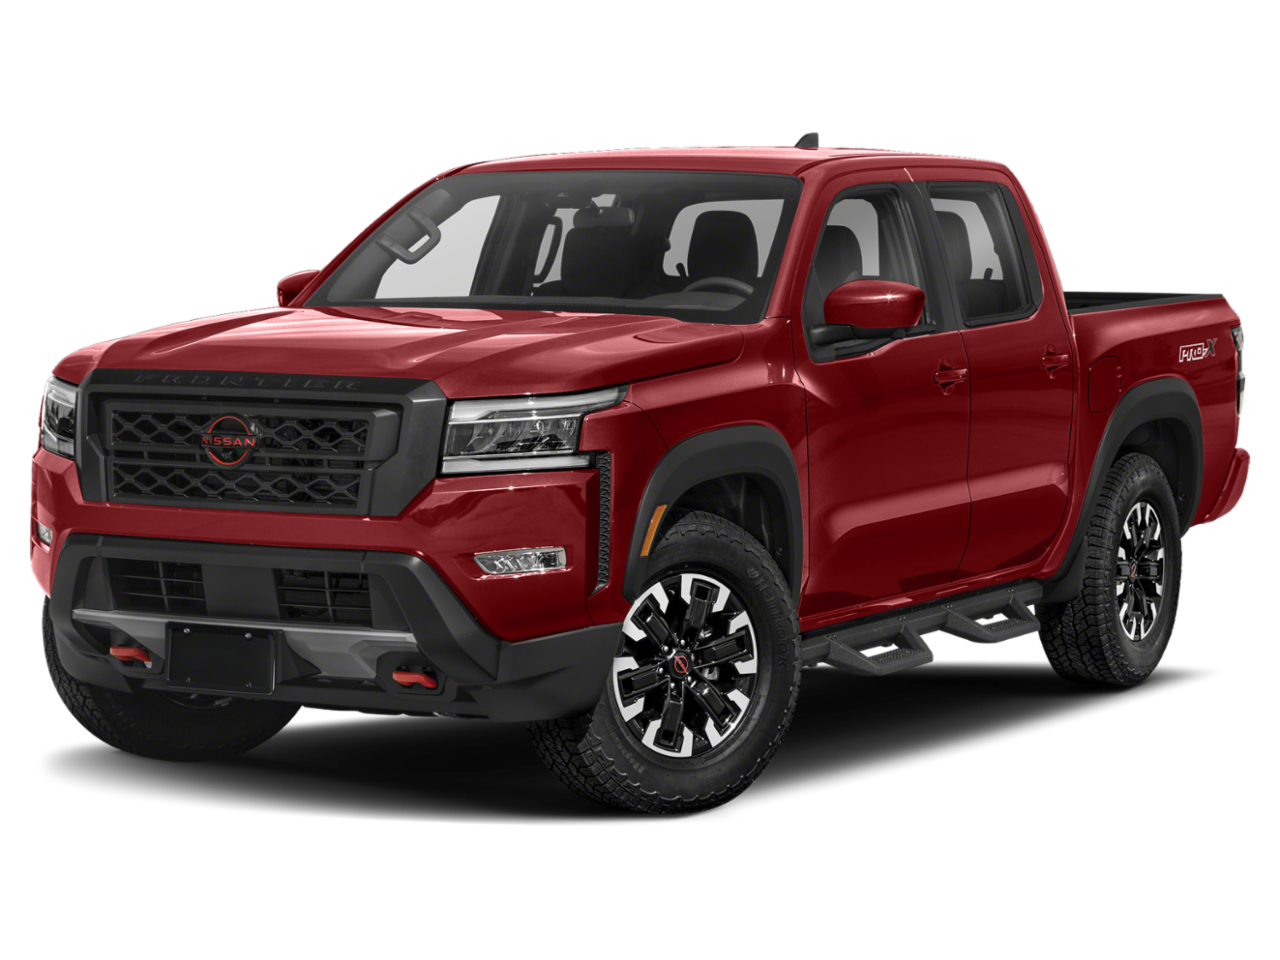 New 2023 Nissan Frontier available at Harry Green Nissan, in Clarksburg, WV